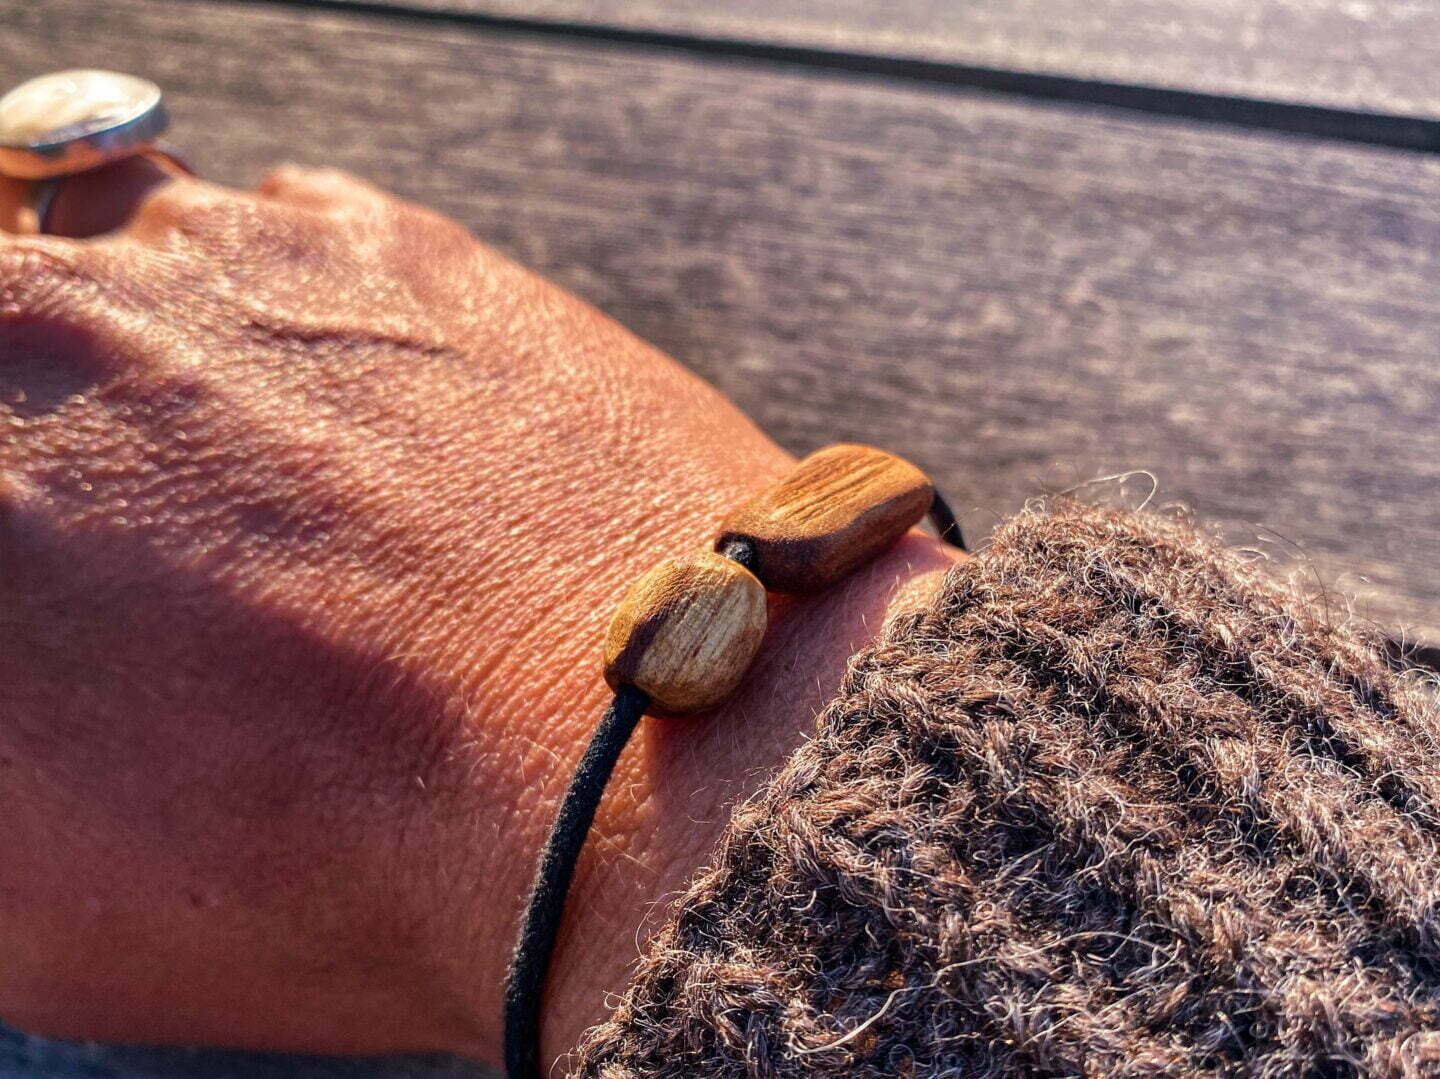 Greece - buttons from driftwood and bracelets from Palo Santo